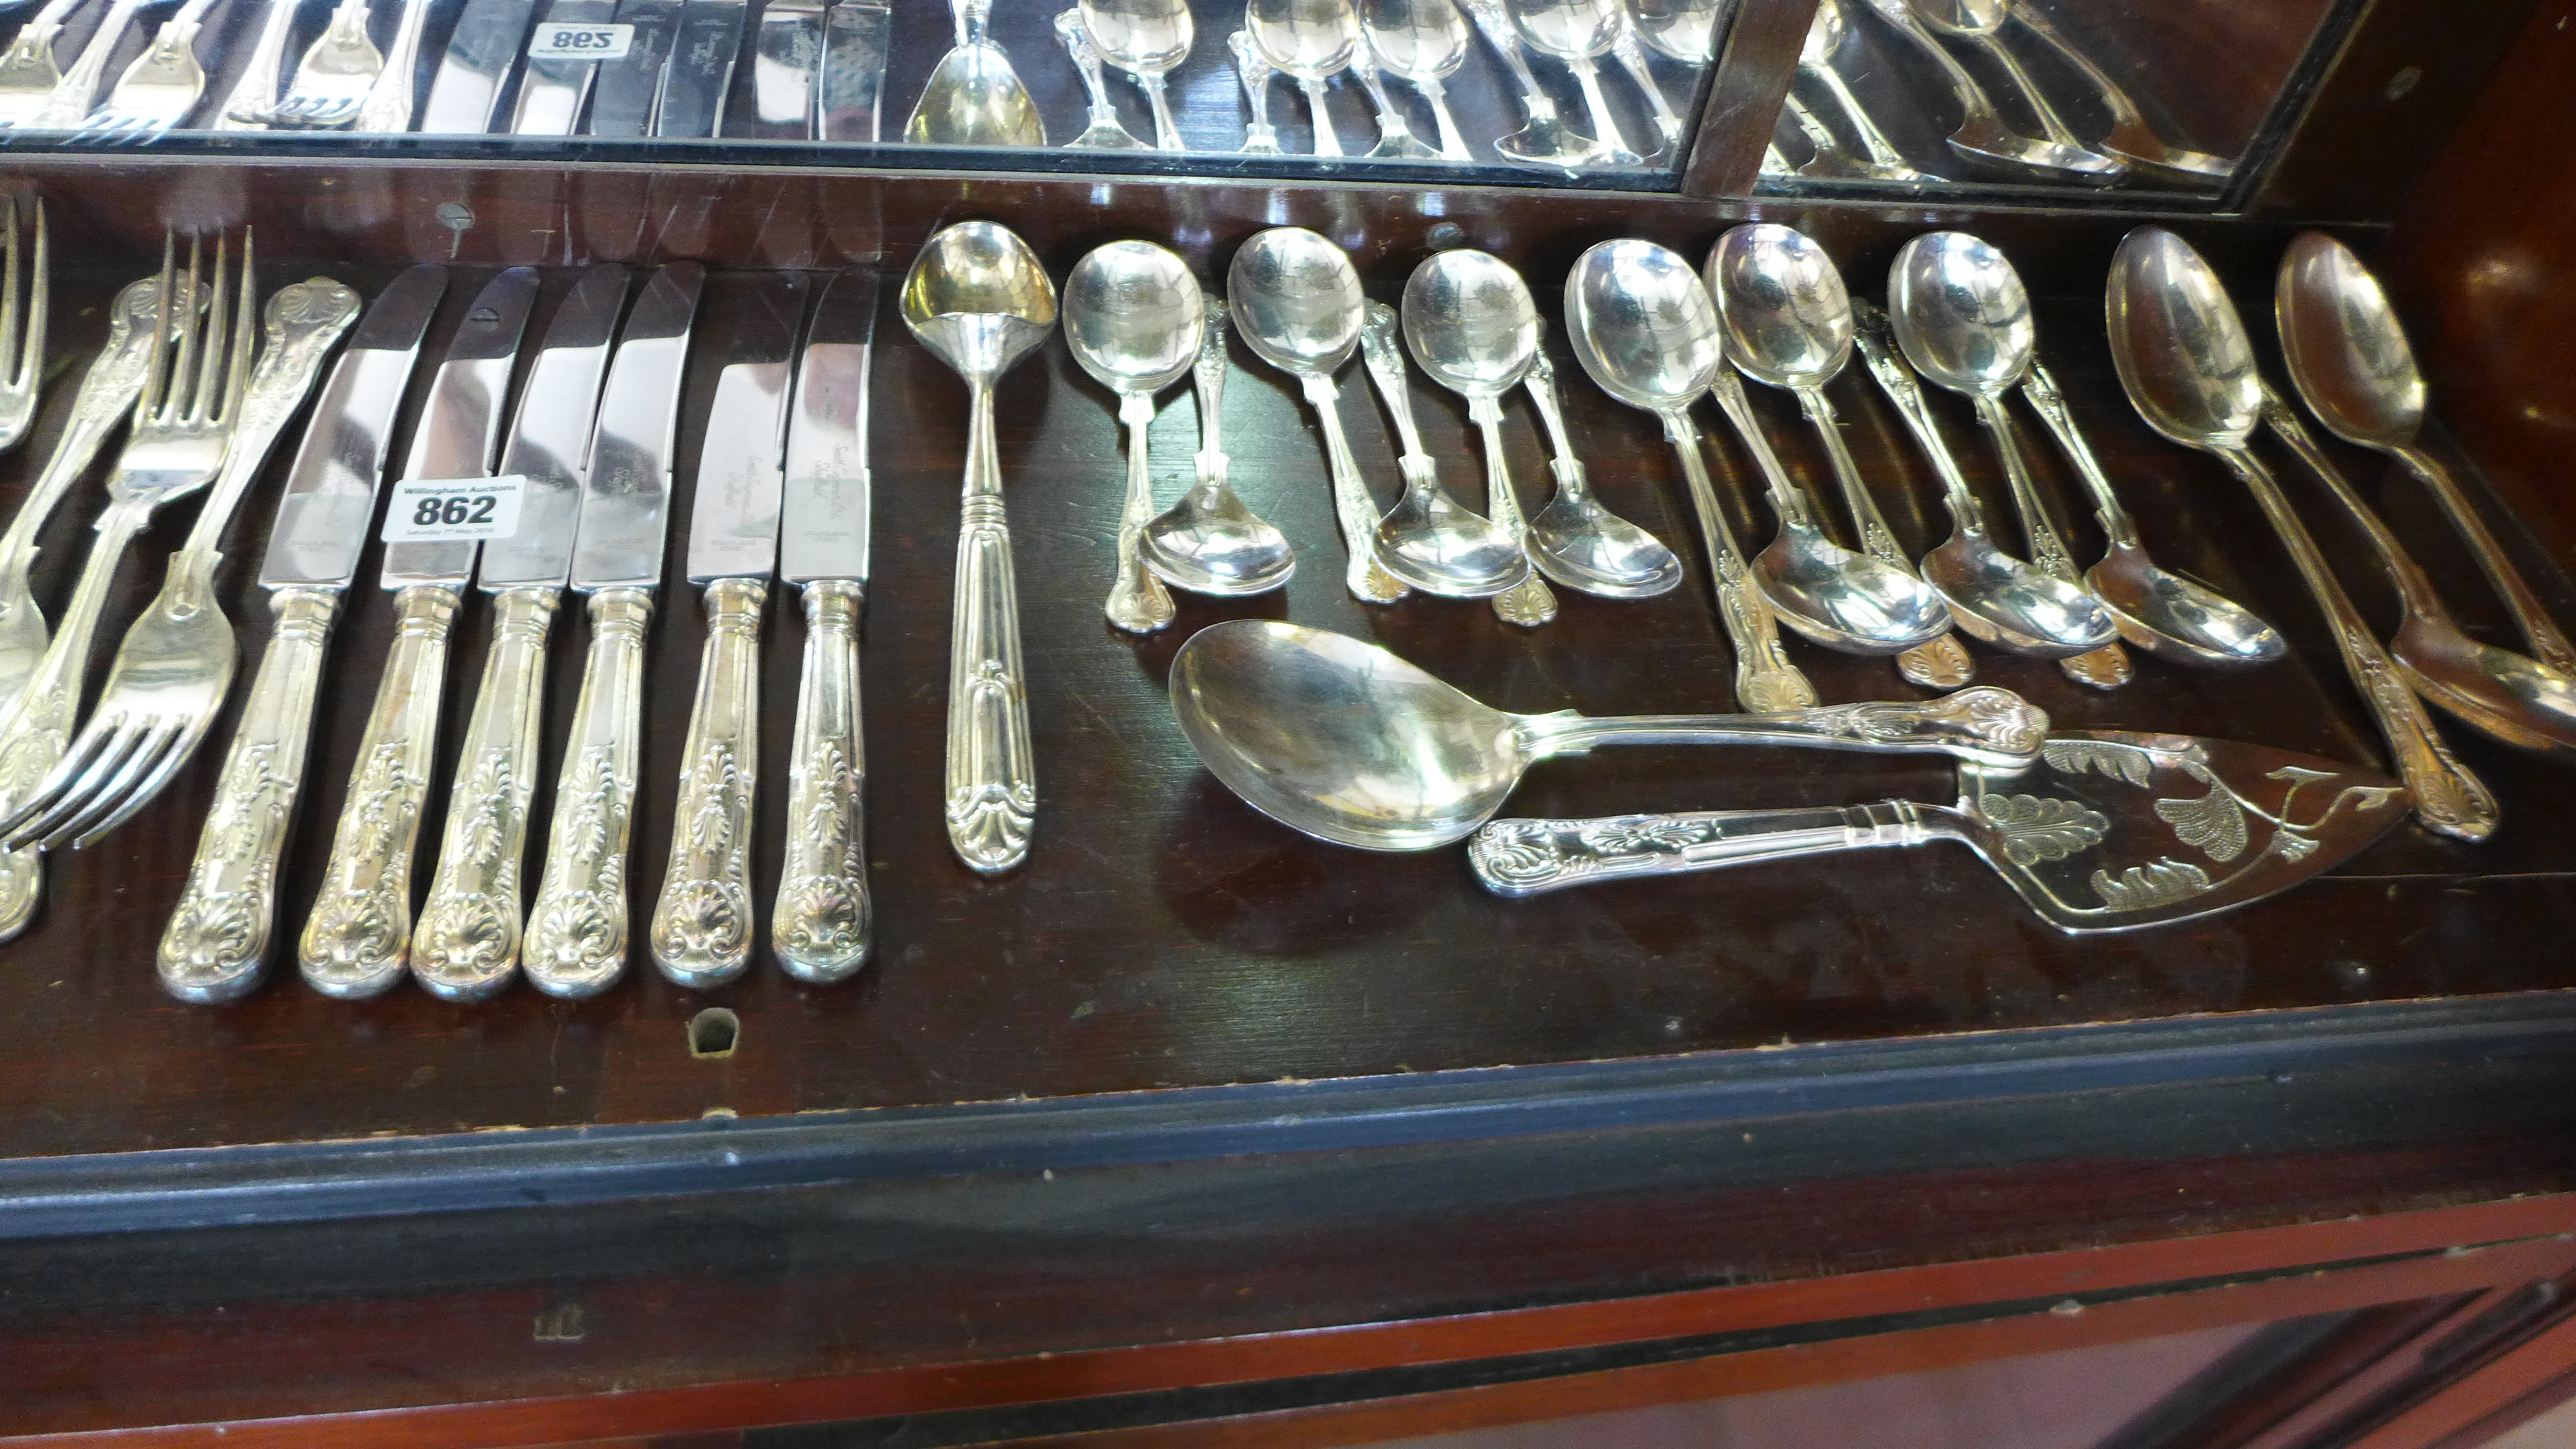 A set of silver plated Kings pattern flatware including six dessert knives, forks and spoons, - Image 3 of 3